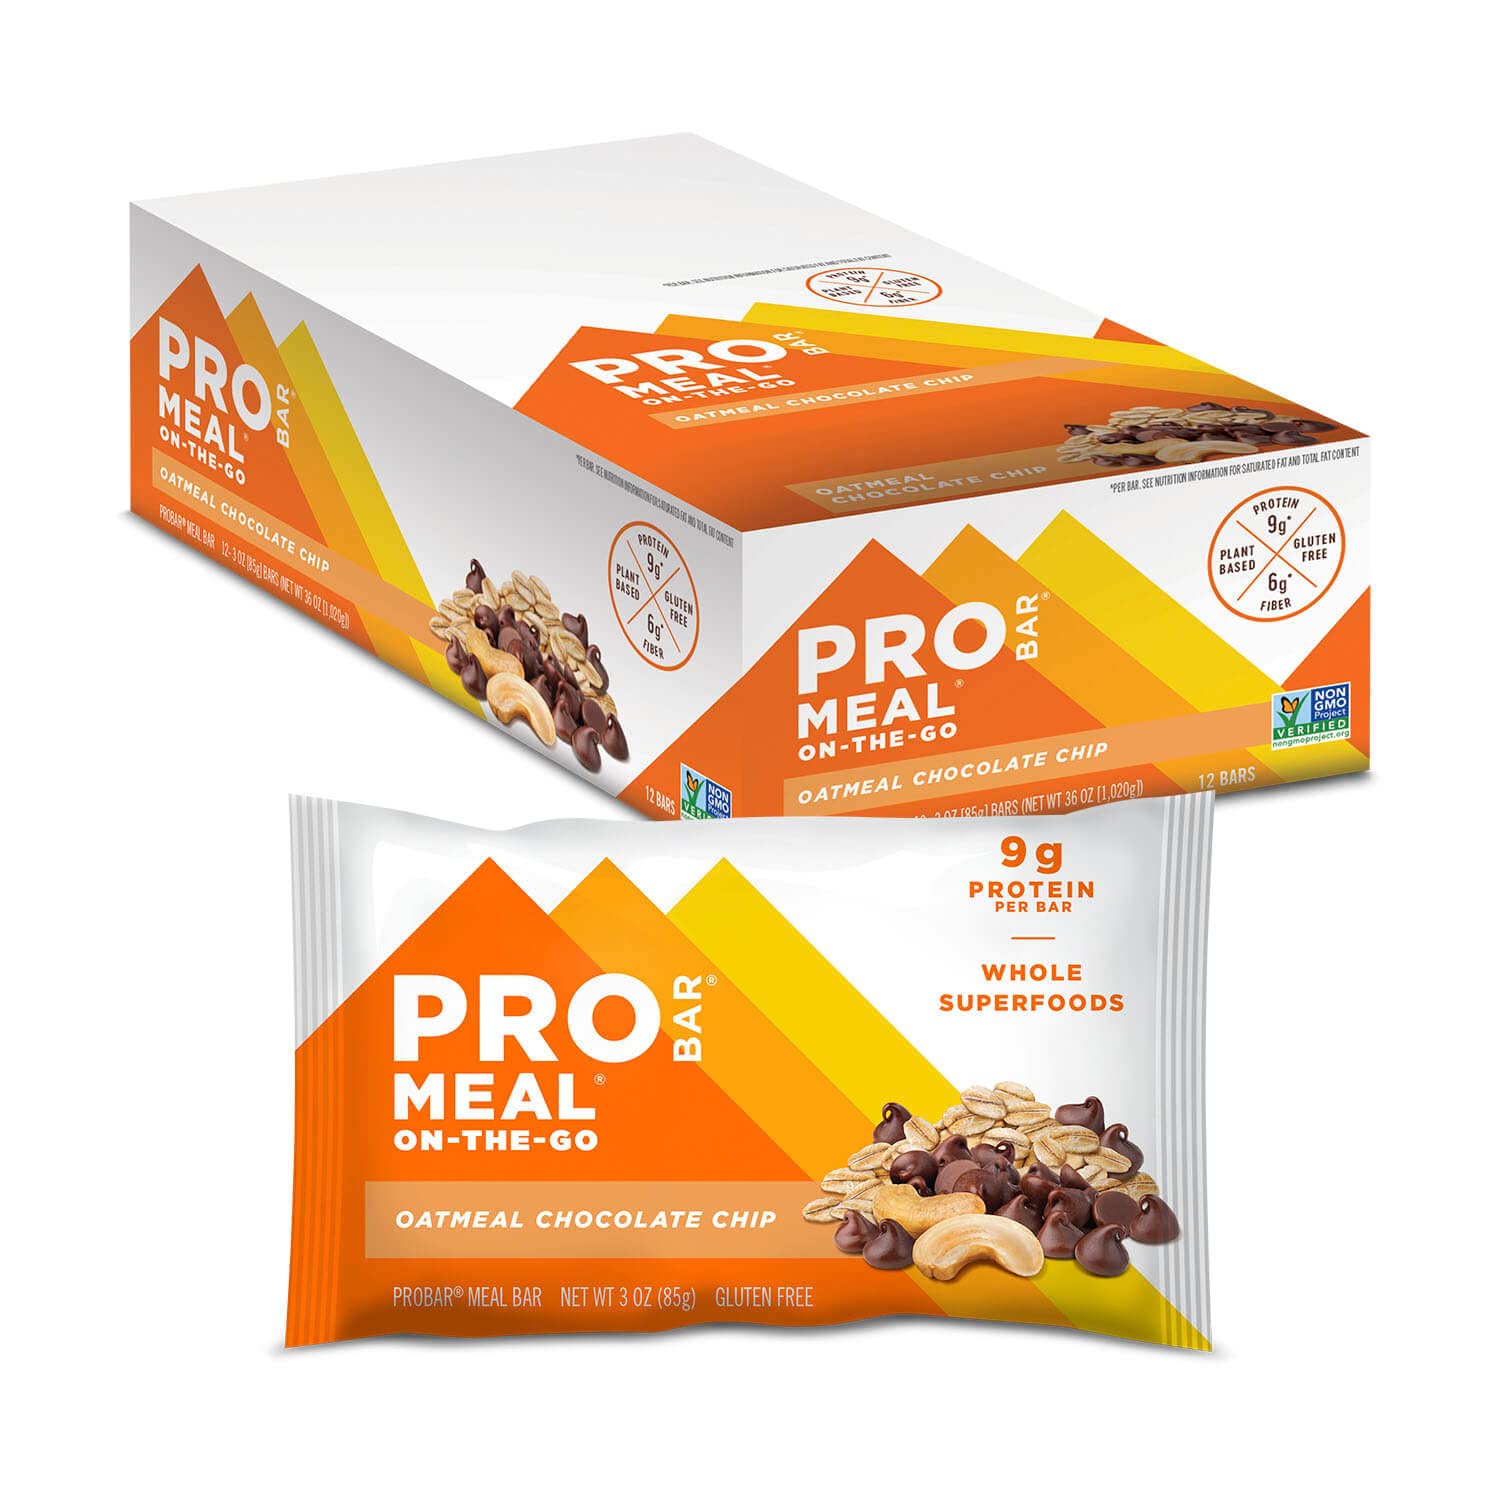 PROBAR - Meal Bar, Oatmeal Chocolate Chip, Non-GMO, Gluten-Free, Healthy, Plant-Based Whole Food Ingredients, Natural Energy, 3 Ounce (Pack of 12)